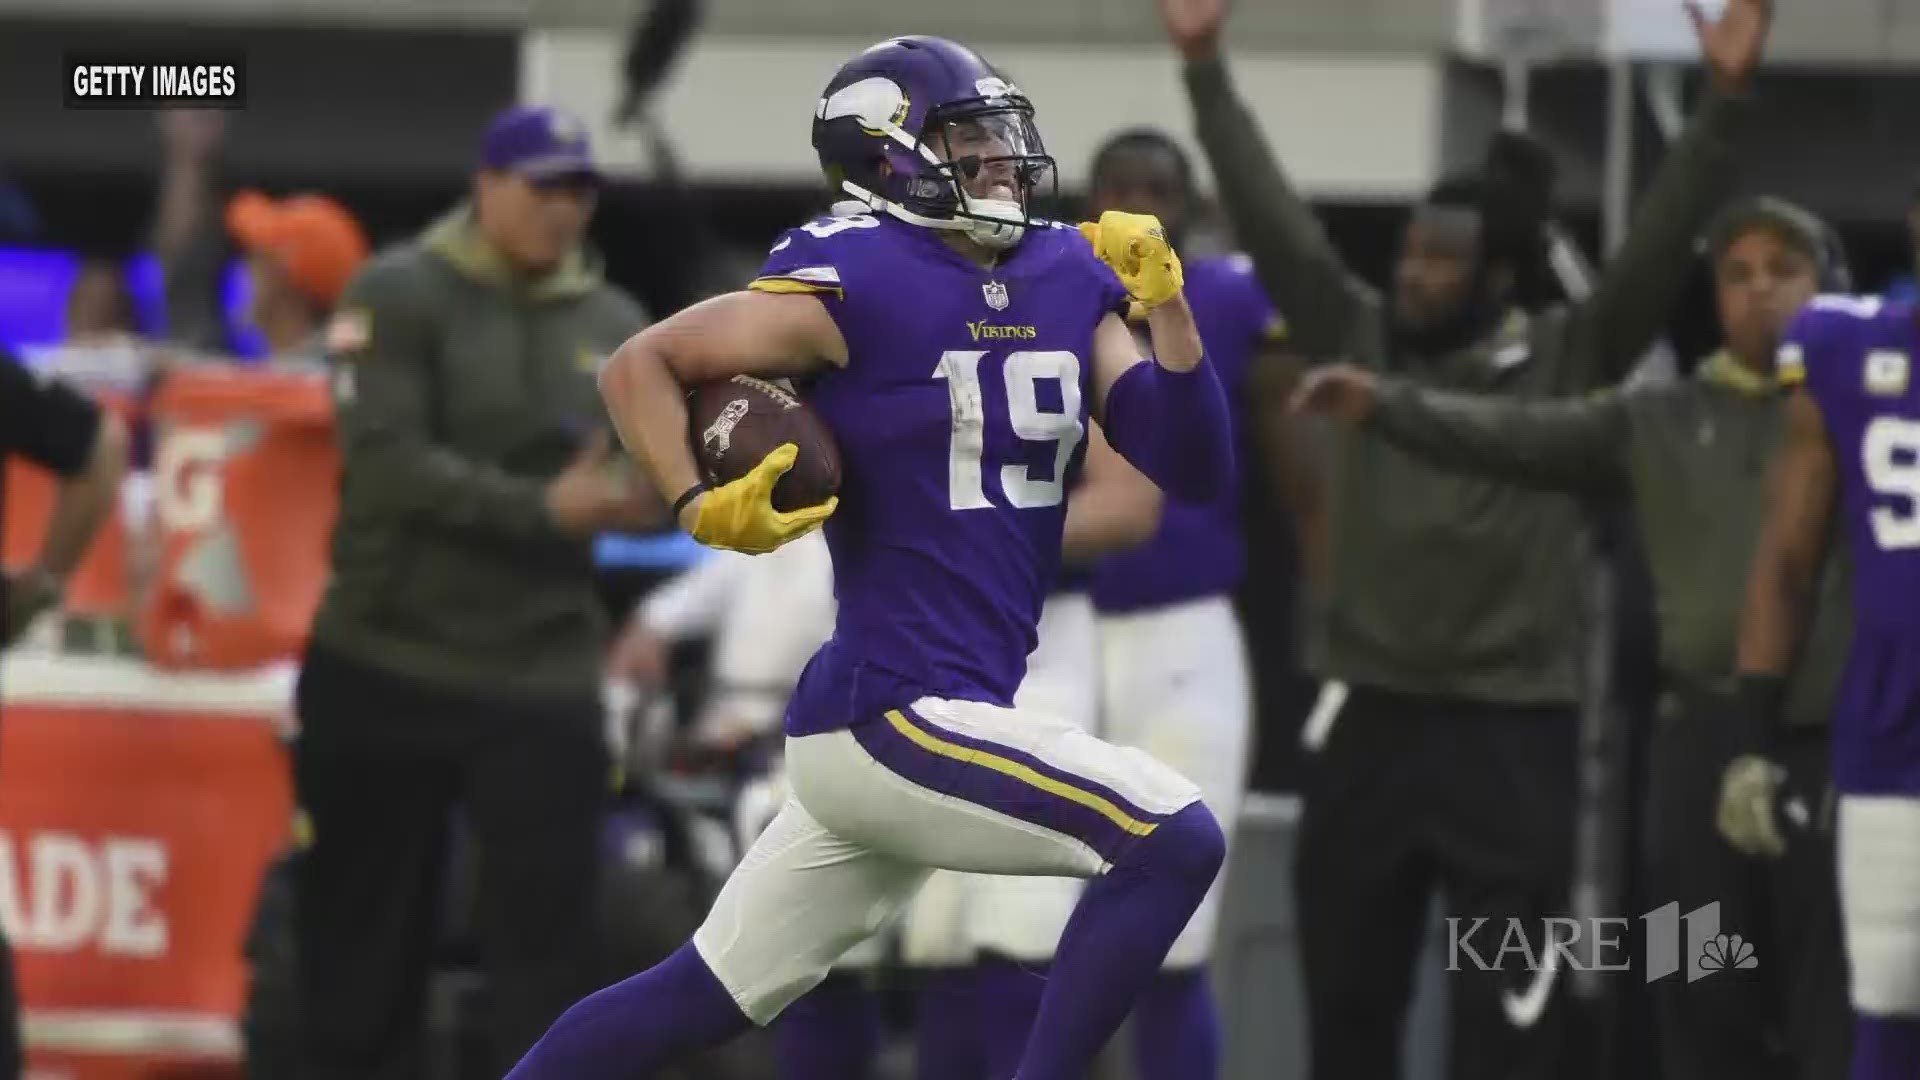 Sunday, Adam Thielen made NFL history, becoming the first player in the Super Bowl era to go over 100 yards receiving in all five games to start a season. KARE 11's Cory Hepola goes over the journey that's led him here. https://kare11.tv/2IKXfi7